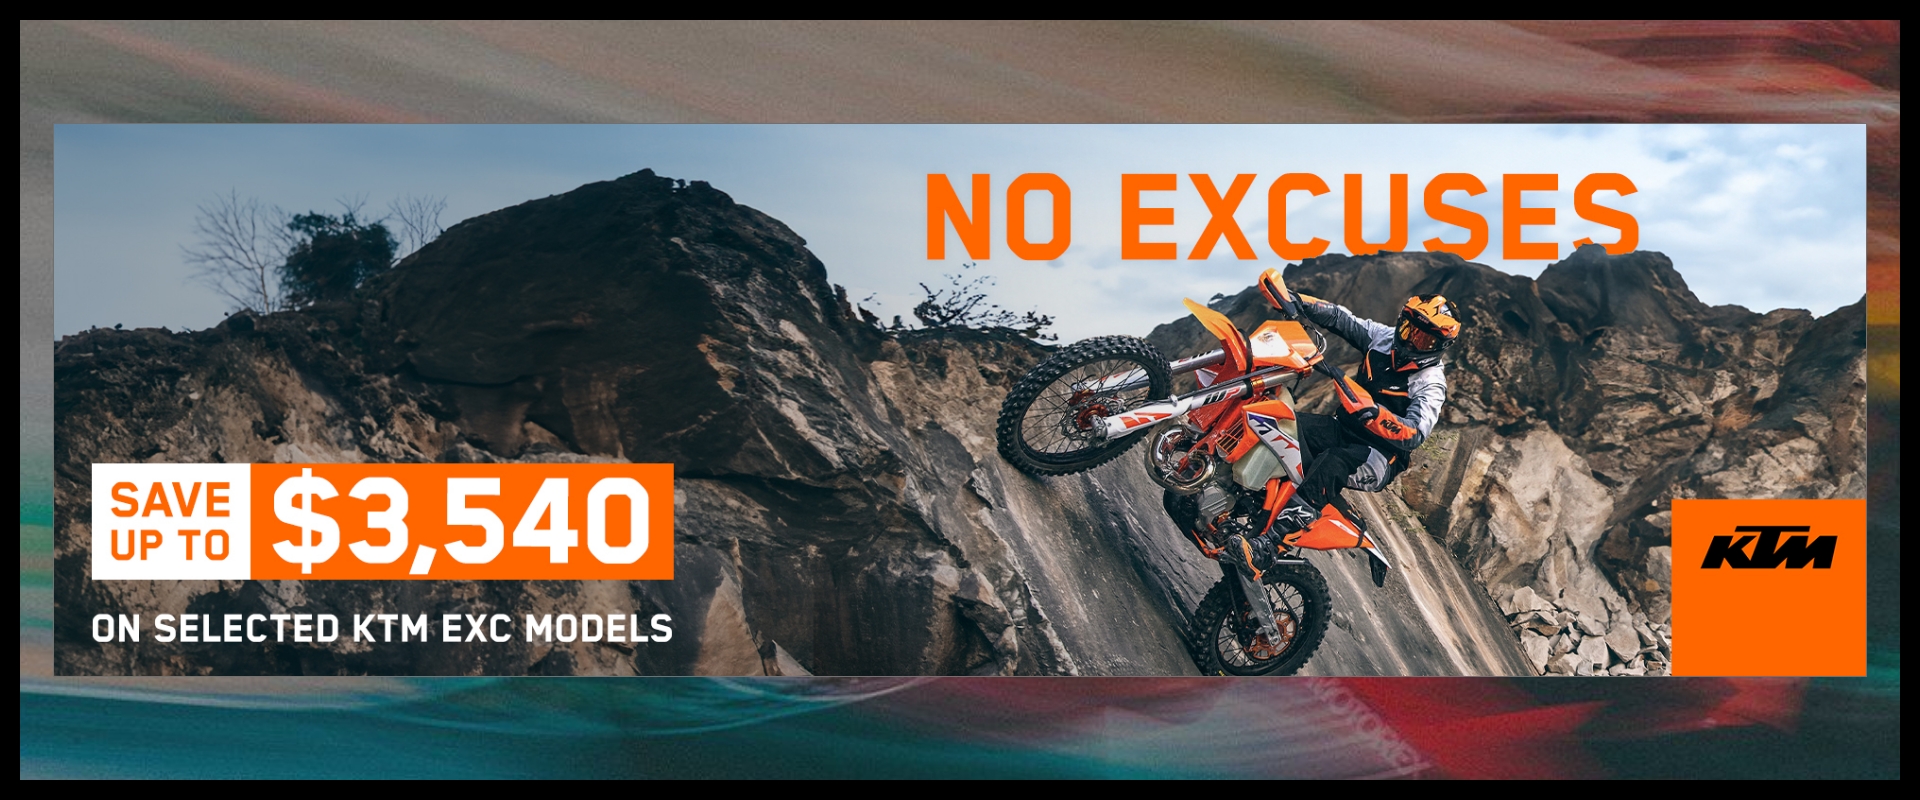 ktm-no-excuses save up to $3540